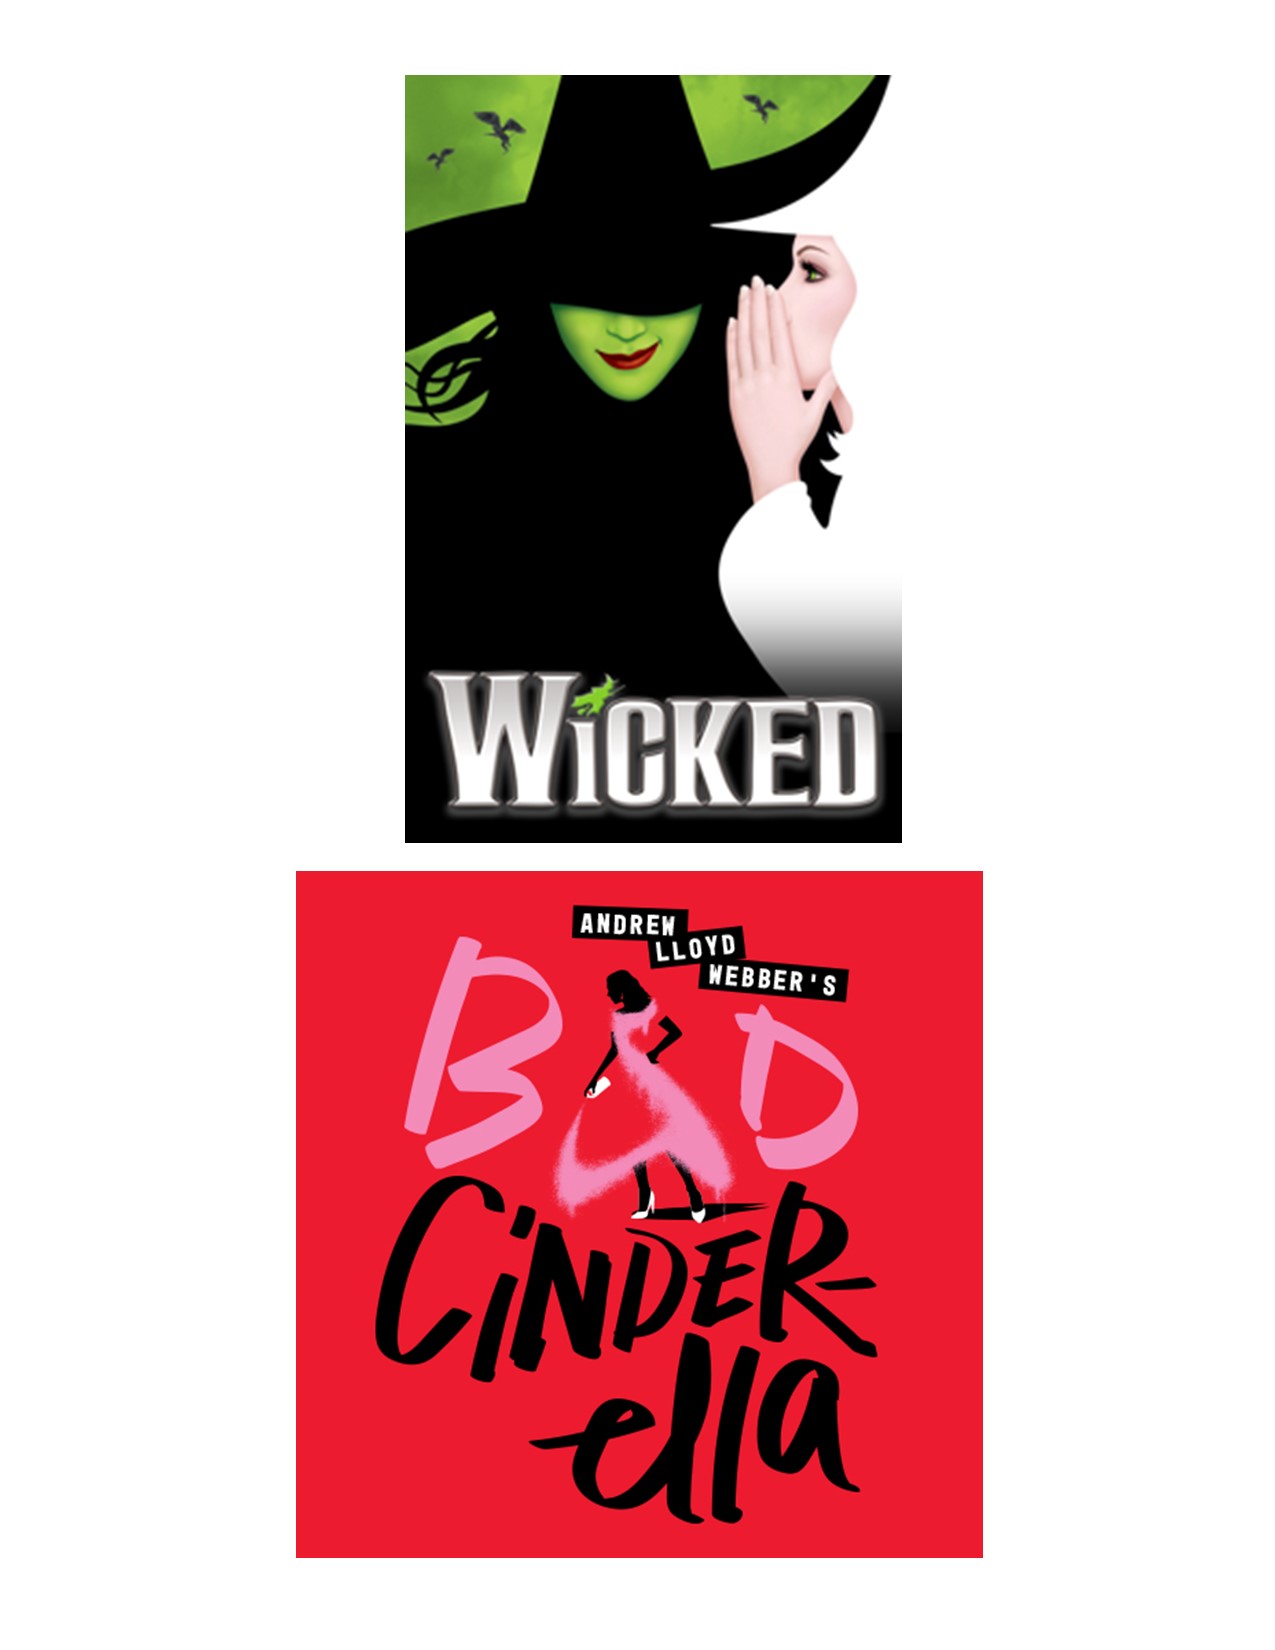 Broadway Shows: Wicked or Bad Cinderella